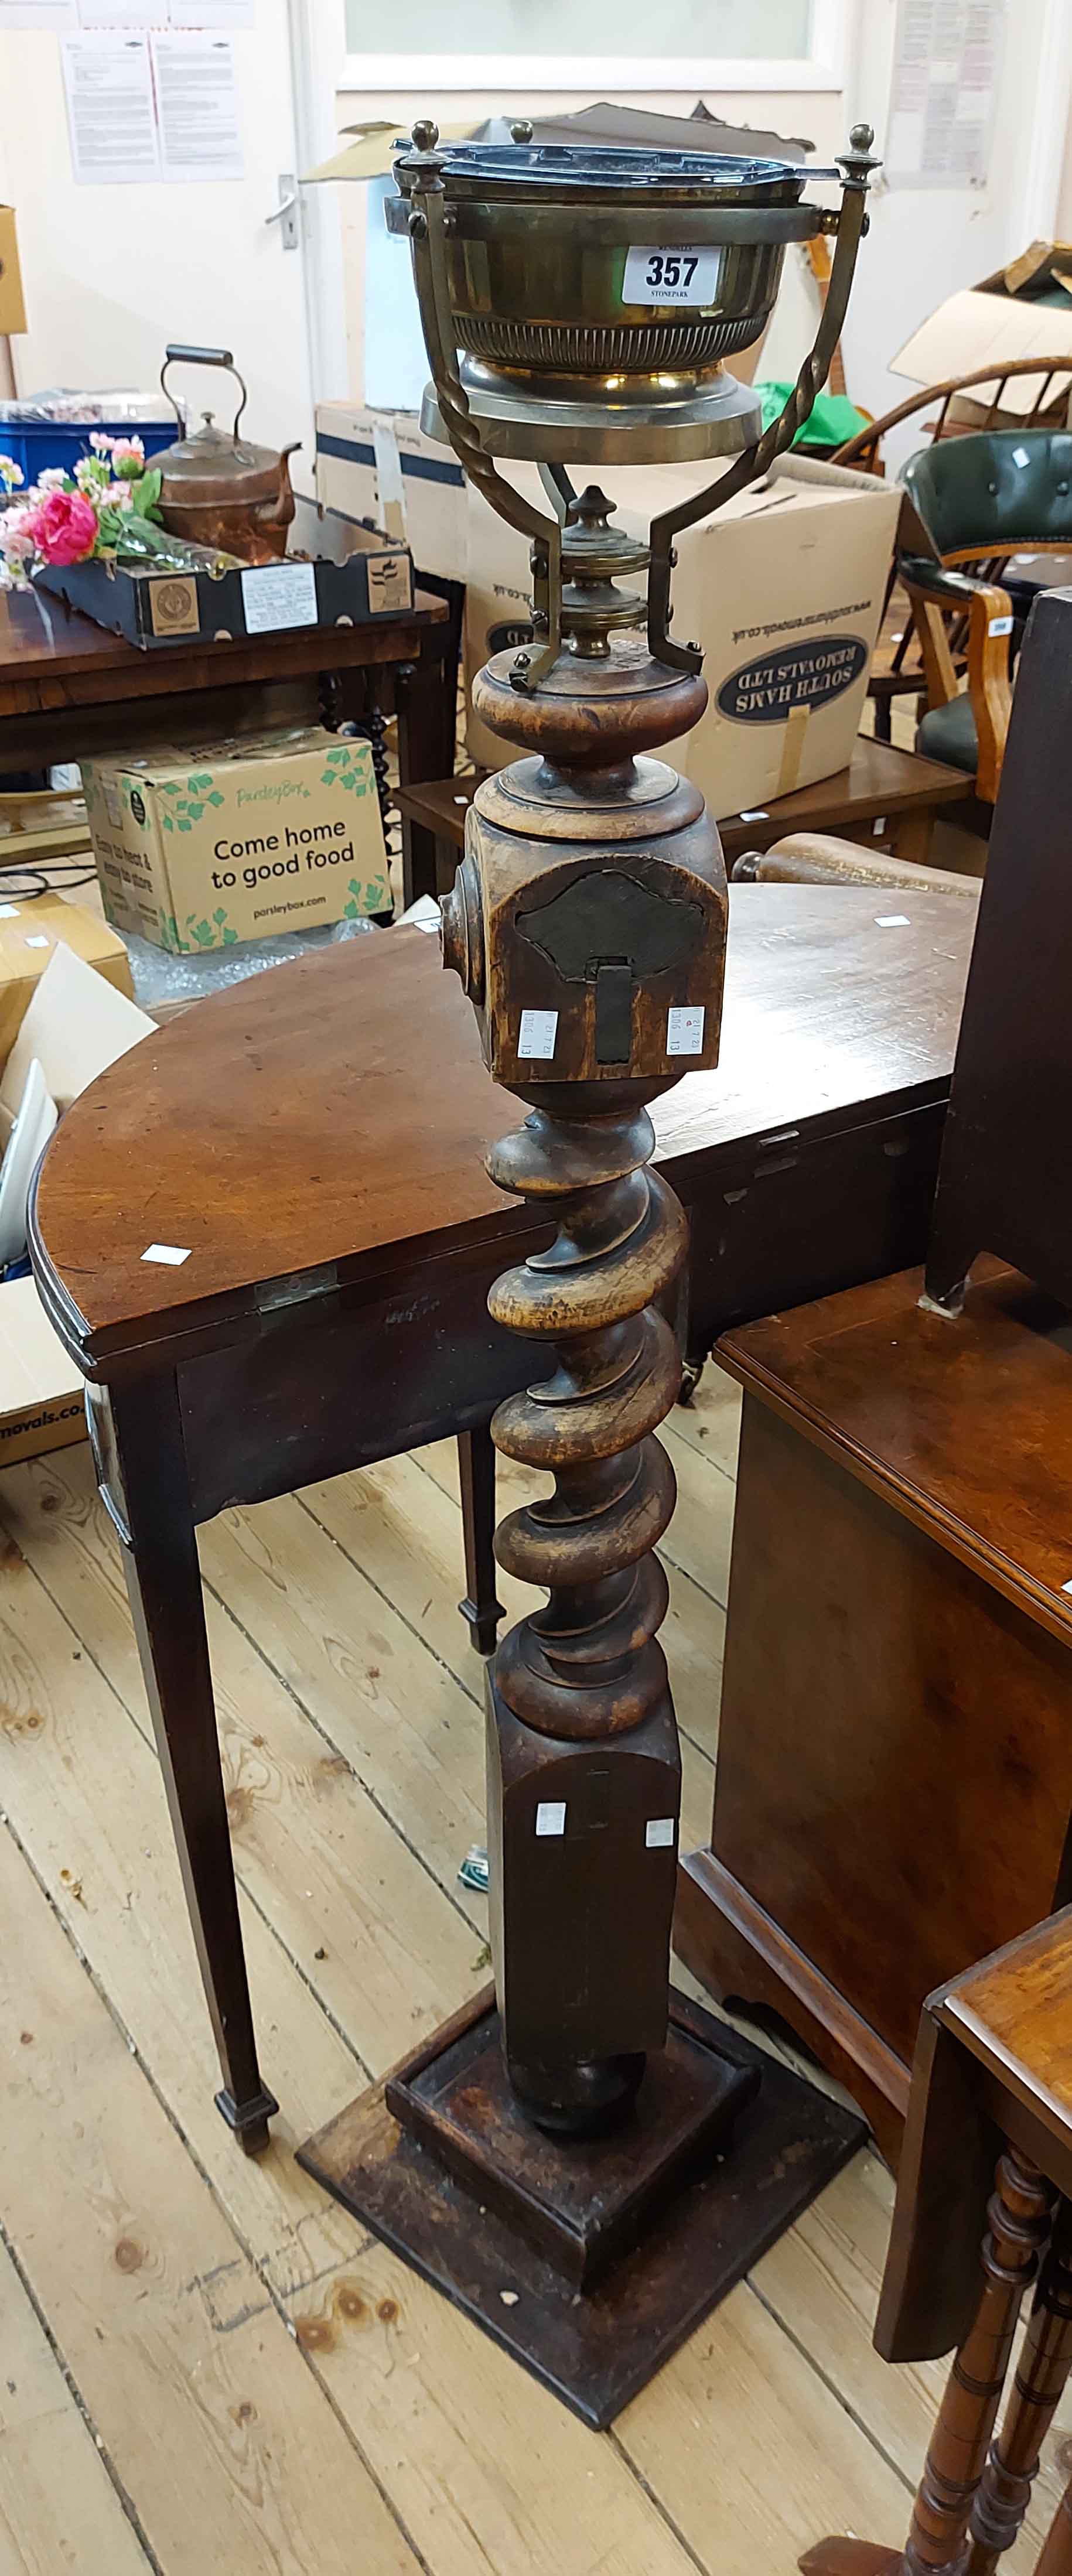 A torchere formed from an antique tester bedpost with brass holder to top and stained wood plinth